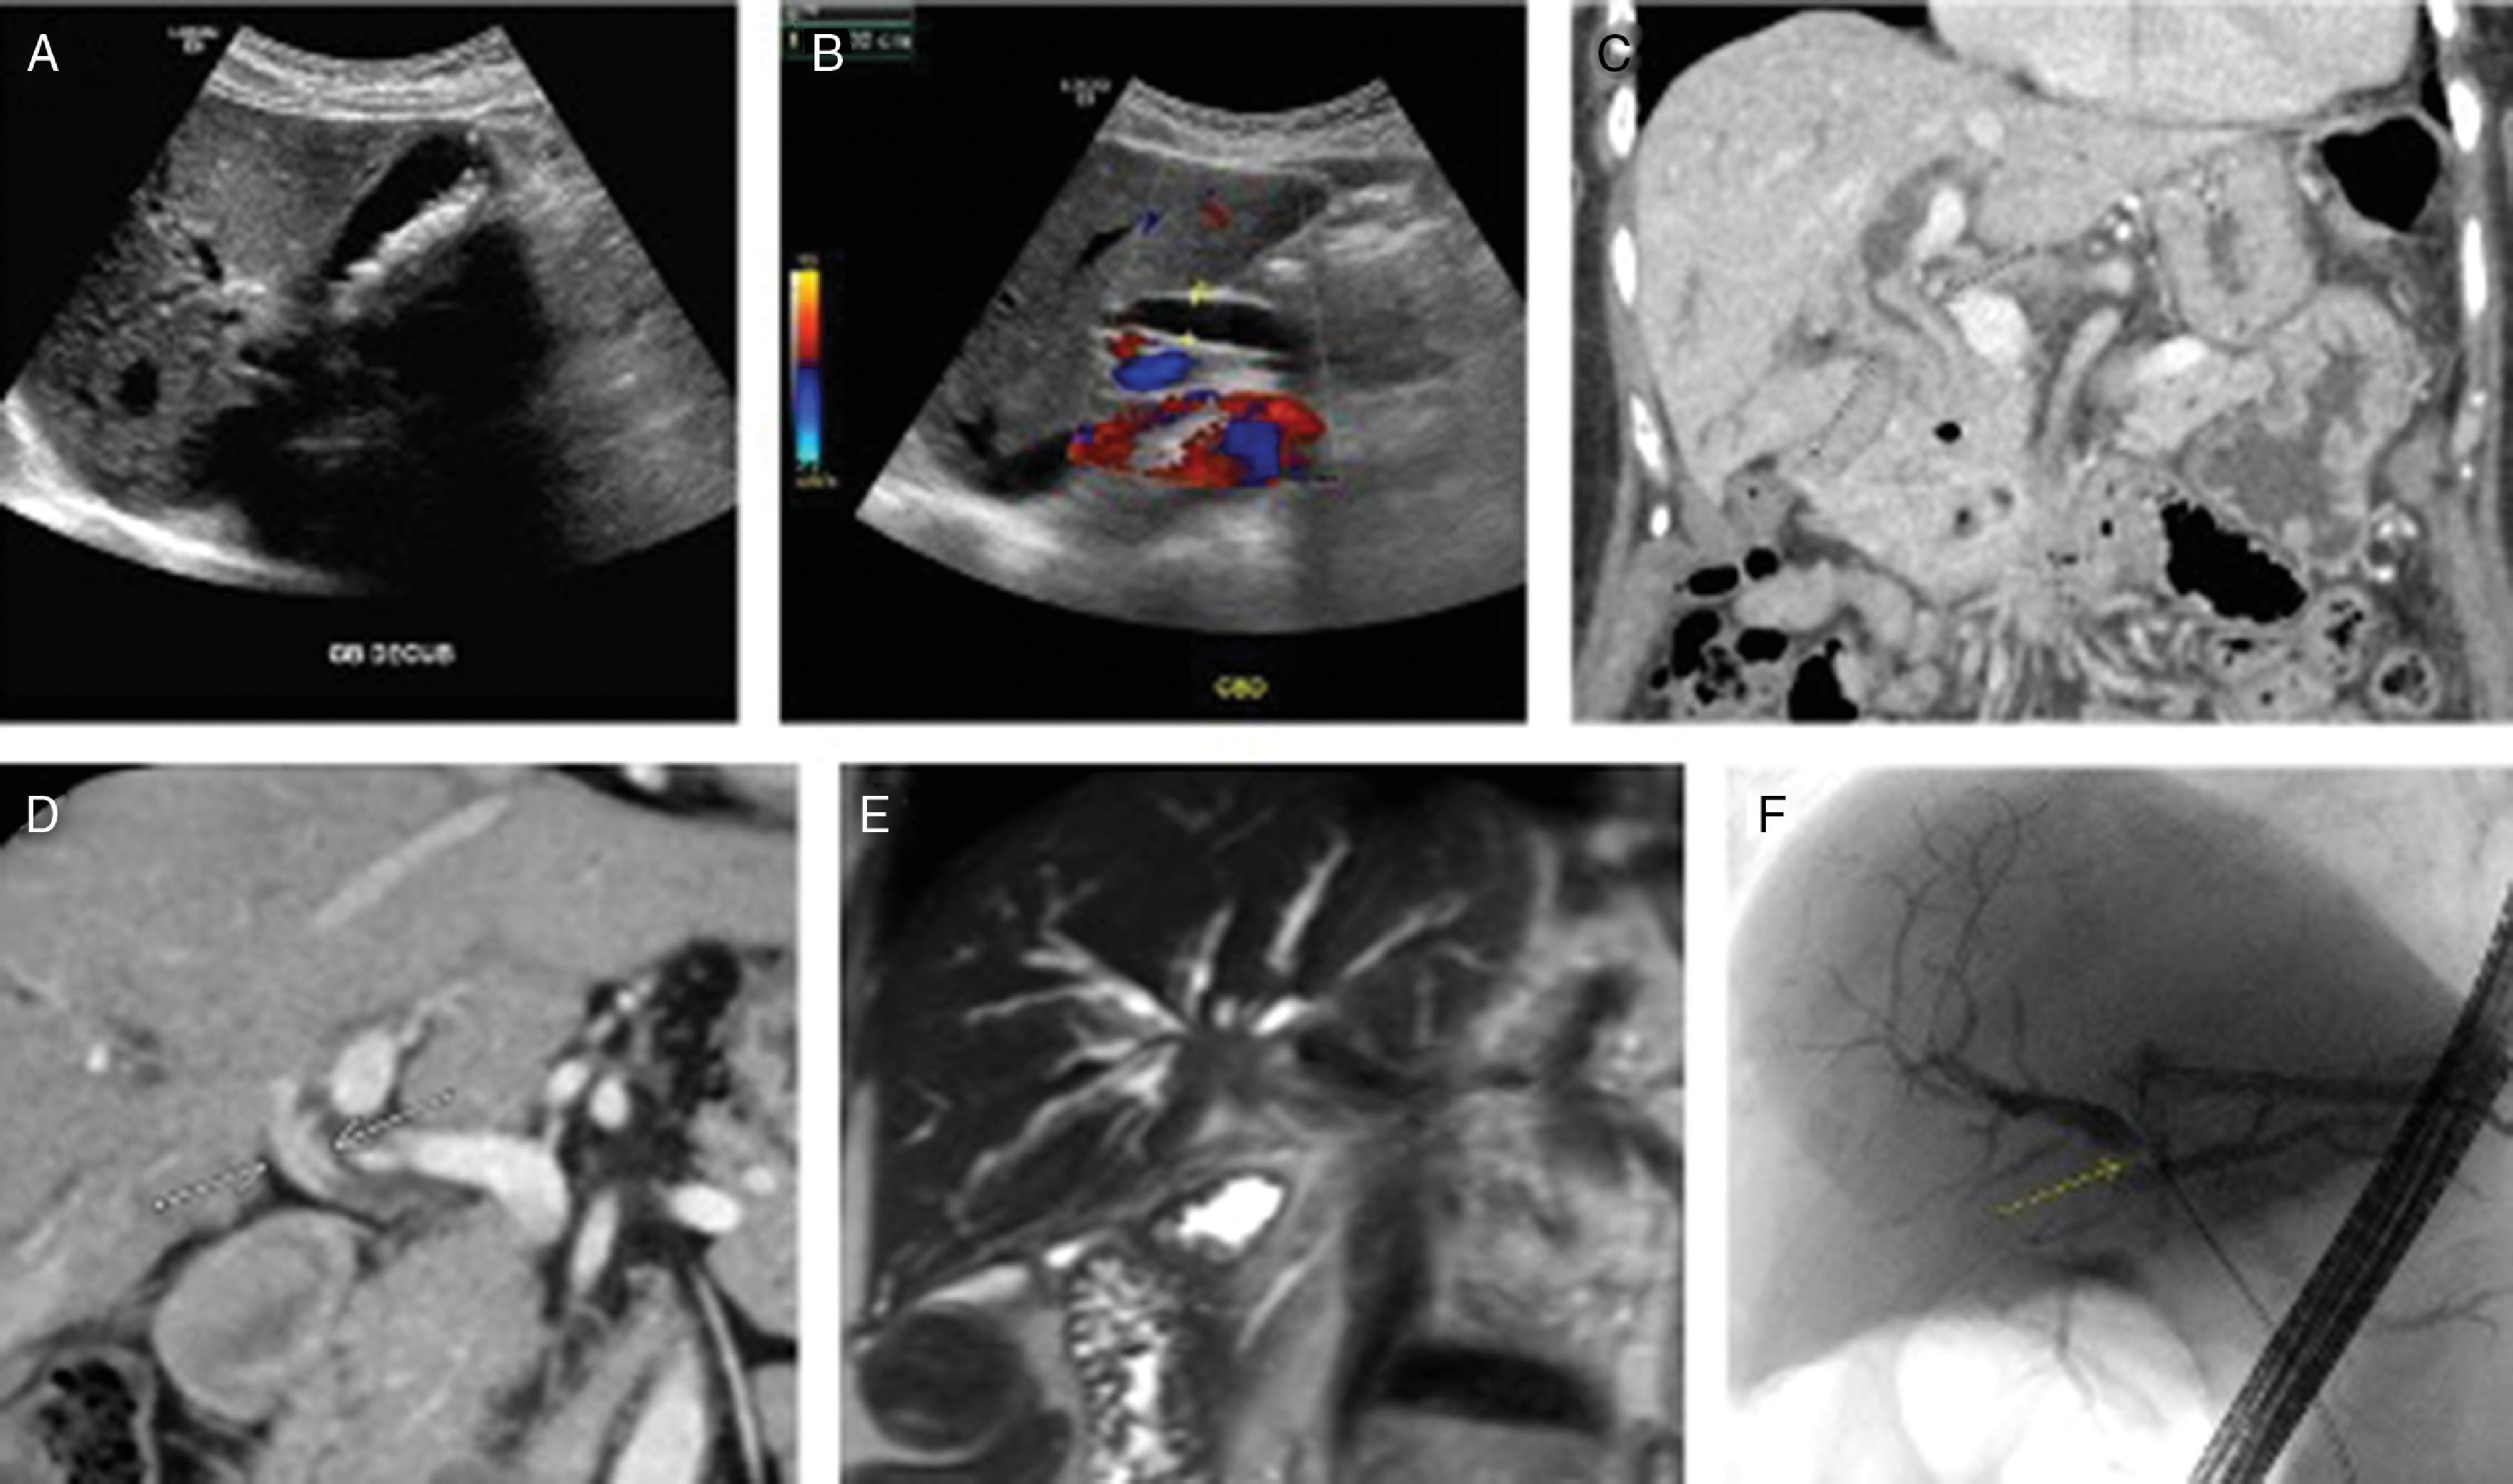 FIG. 1, Imaging findings with cholangitis. (A) Cholelithiasis on ultrasound. (B) Common bile duct dilation on ultrasound. (C) Extrahepatic bile duct dilation on abdominal CT. Common hepatic duct stricture from cholangiocarcinoma seen on abdominal CT (D), MRCP (E), and ERCP (F).